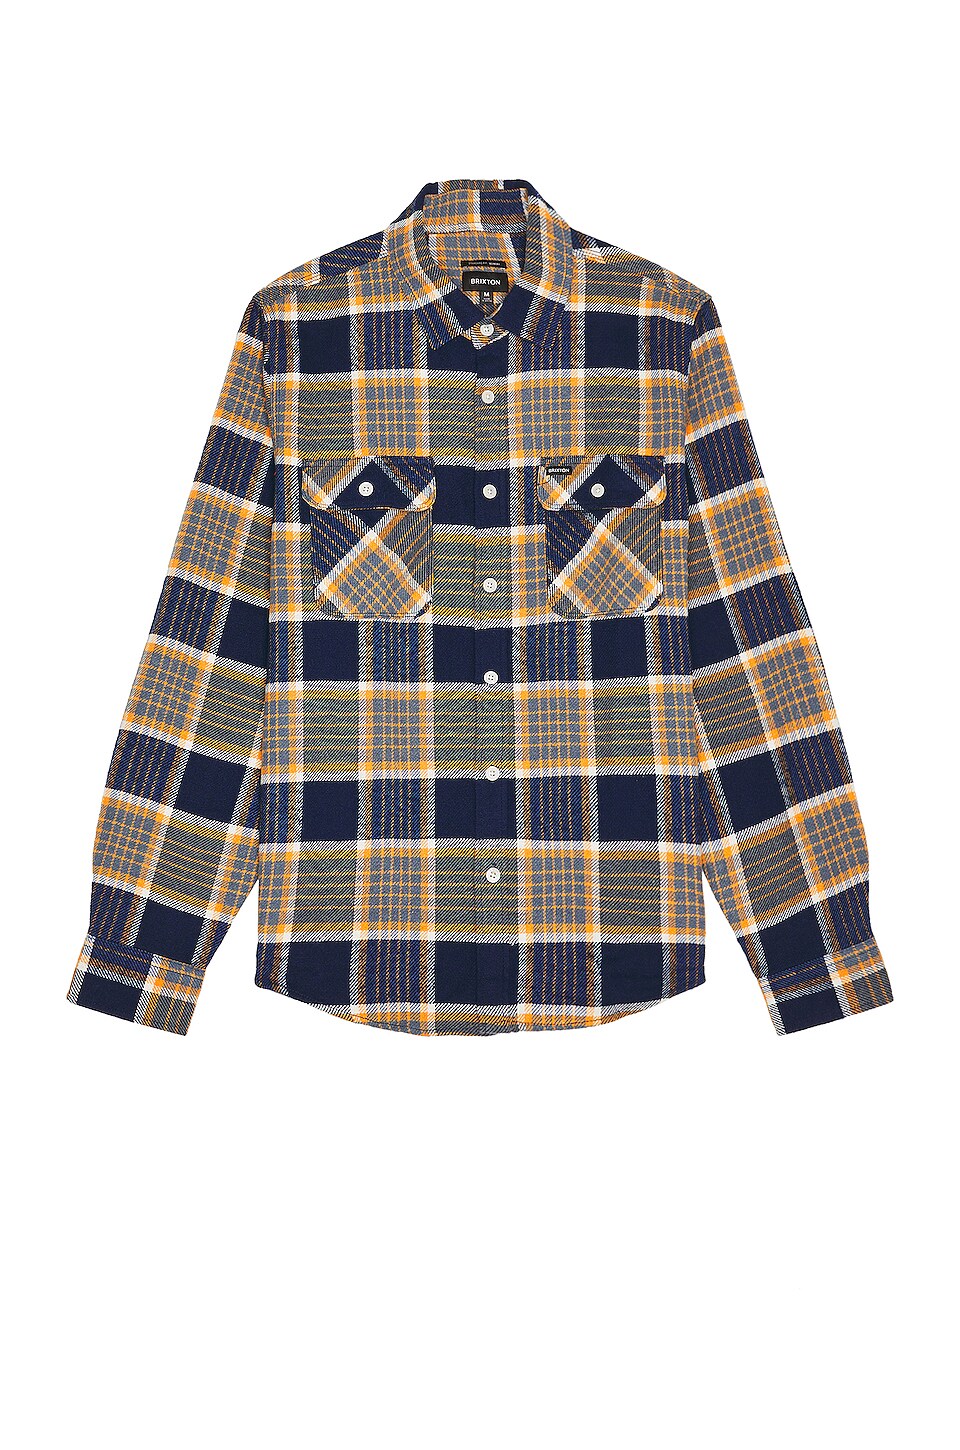 Bowery Long Sleeve Flannel in Monlit Ocean Briht Gold & Off White Revolve Uomo Abbigliamento Top e t-shirt Top also in M, S Blue . Size L 